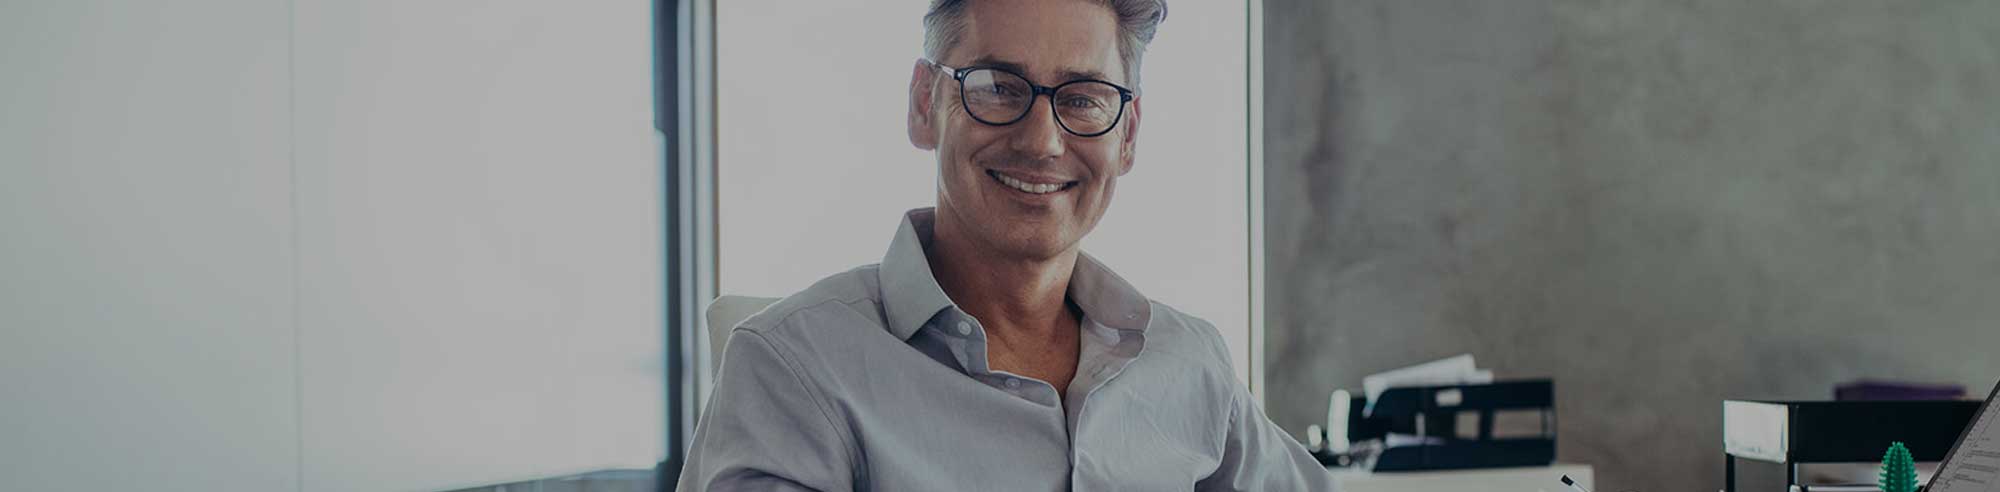 middle-aged man with glasses looking at the camera